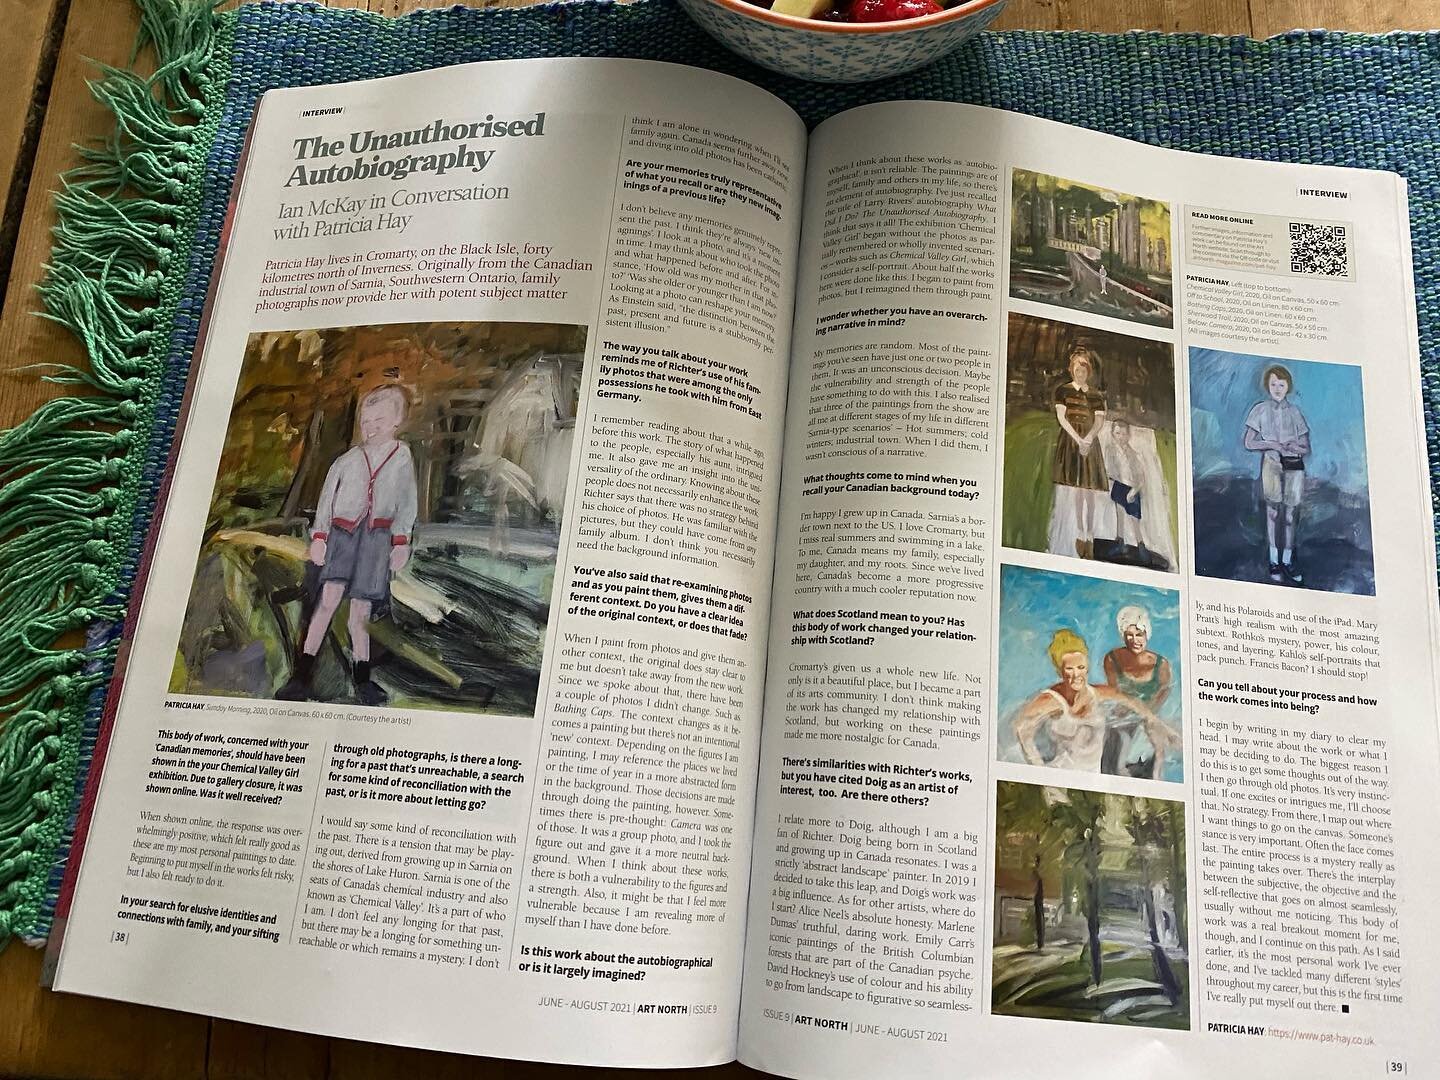 Look 👀 what came in the post this morning! A little breakfast reading! Thanks again Ian McKay and ArtNorth. (ps.the whole issue is brilliant, as usual). 

#artnorth #artnorthmagazine #scottishpainting #scottishart #canadianpainter #canadianpainting